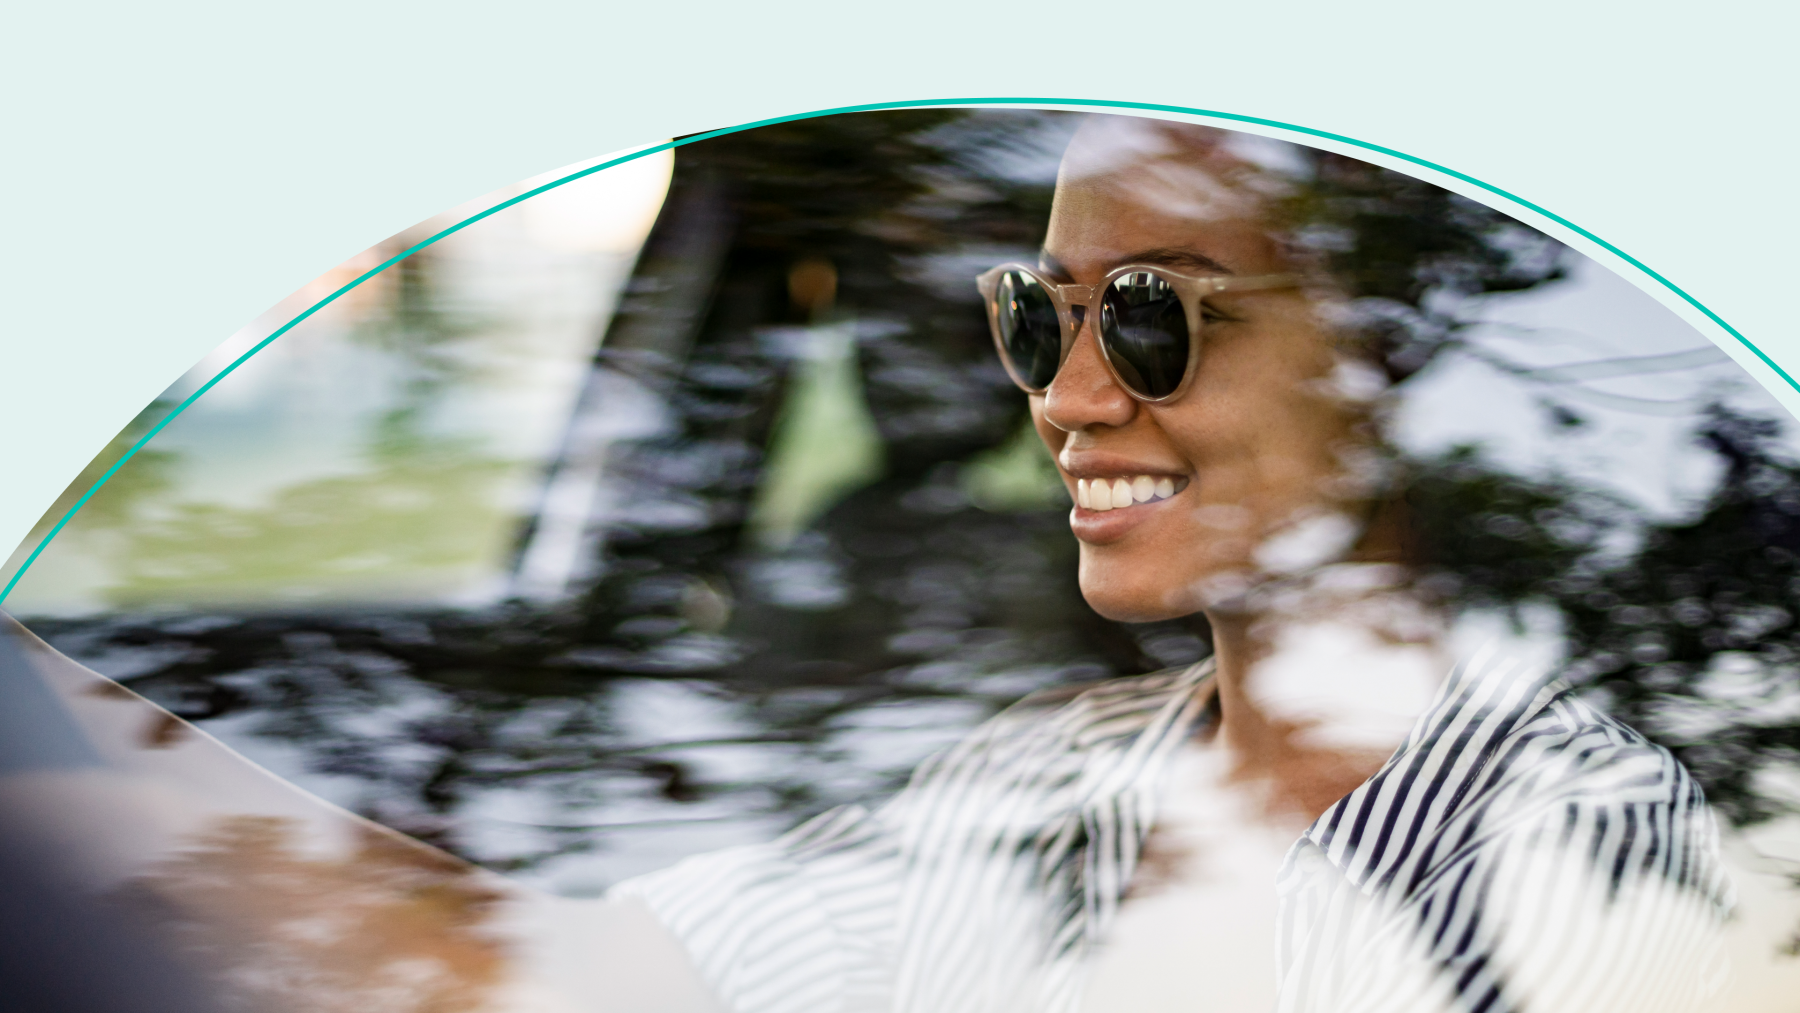 Women wearing sunglasses driving car with teal detail